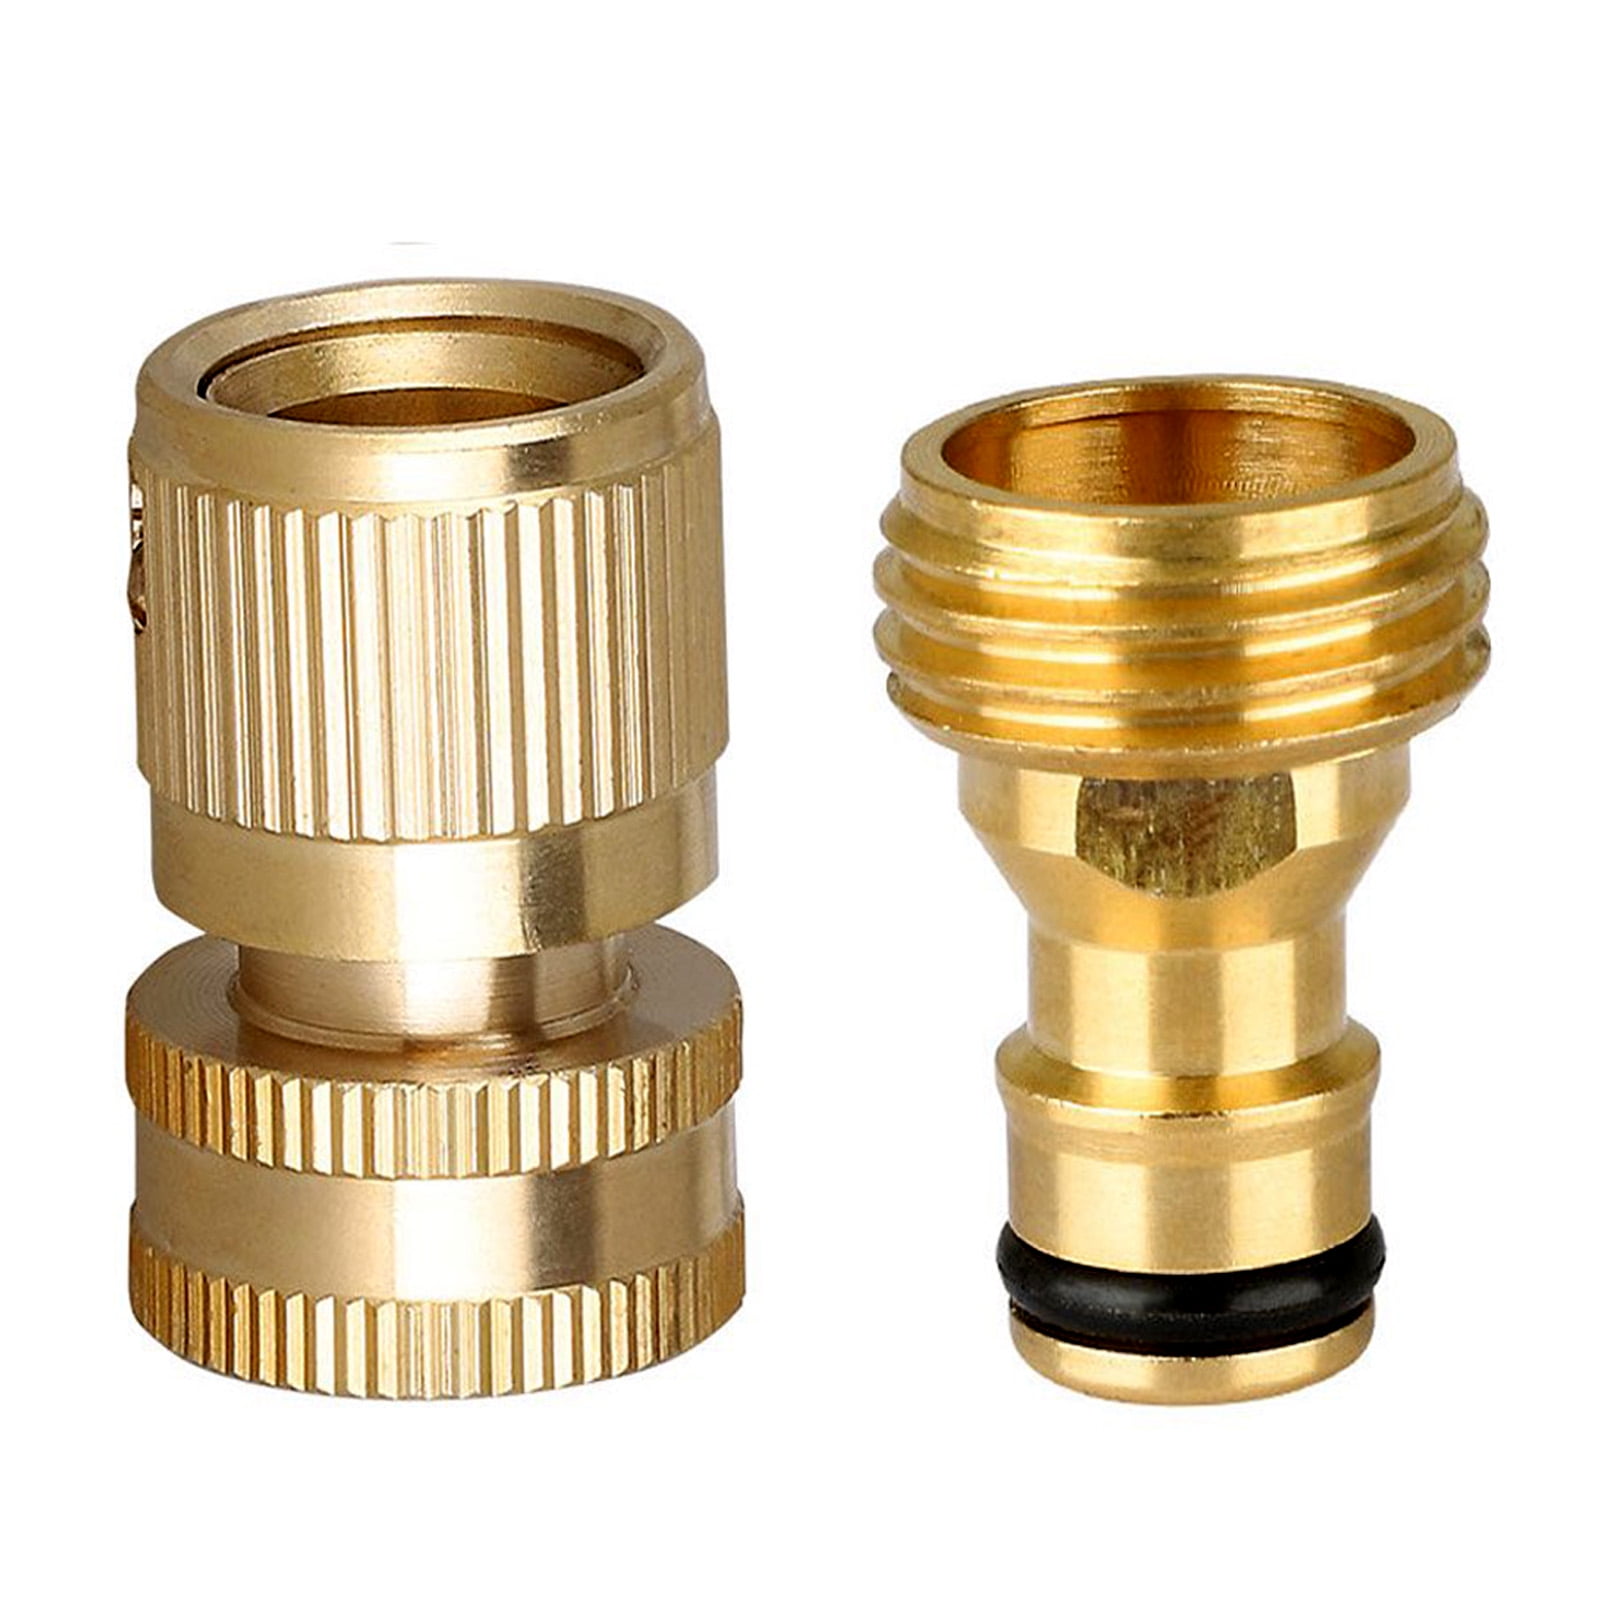 Choose Your Pack DIRECT MFG Garden Hose Quick Connect Male and Female GHT Solid Brass Hose Connectors for Garden Hose Fittings 3/4 Exteernal Quick Connect, Pack of 1